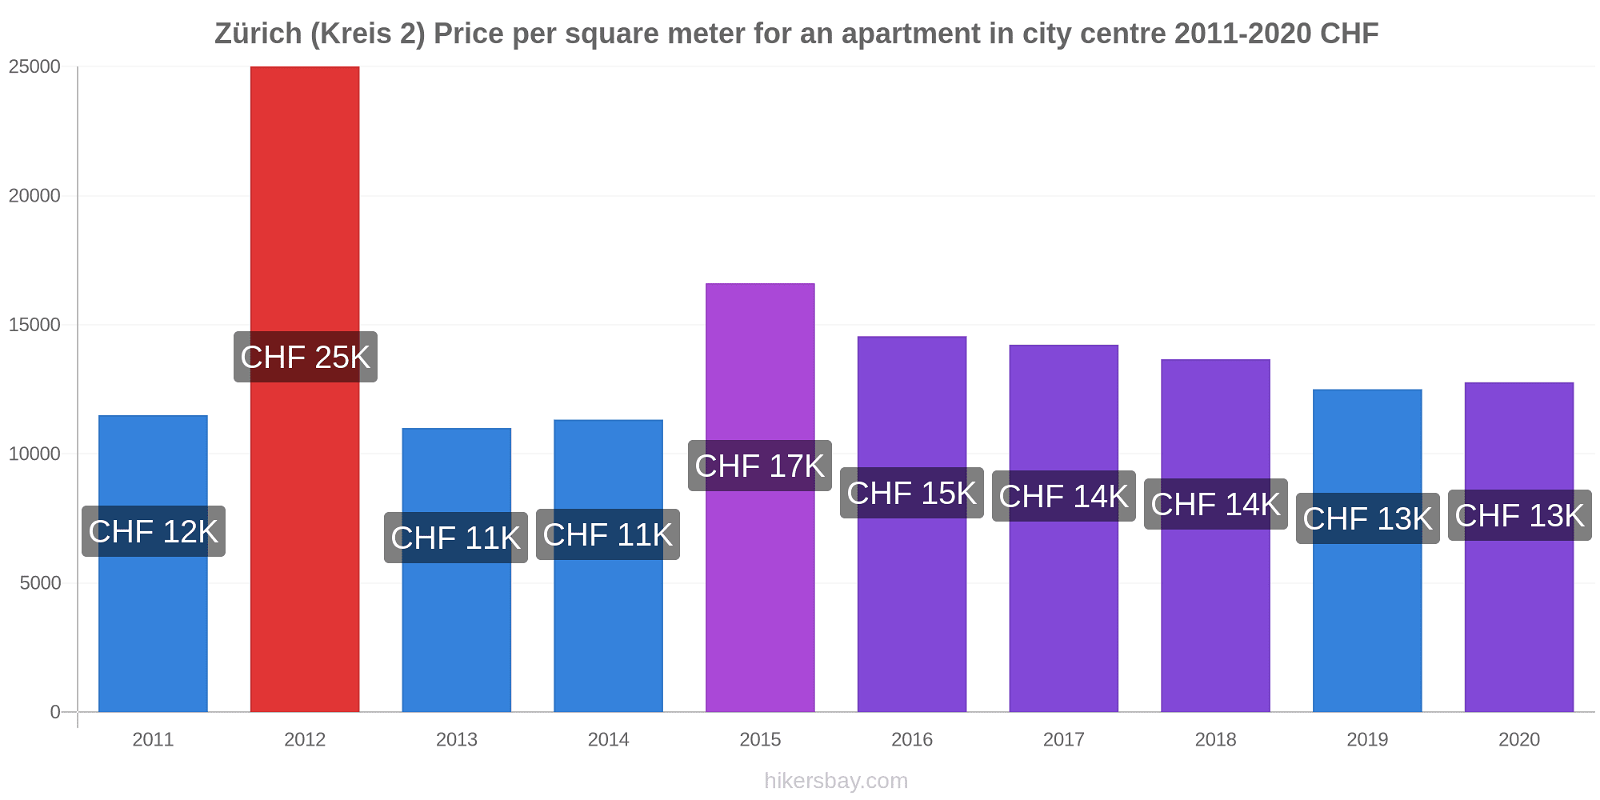 Zürich (Kreis 2) price changes Price per square meter for an apartment in city centre hikersbay.com